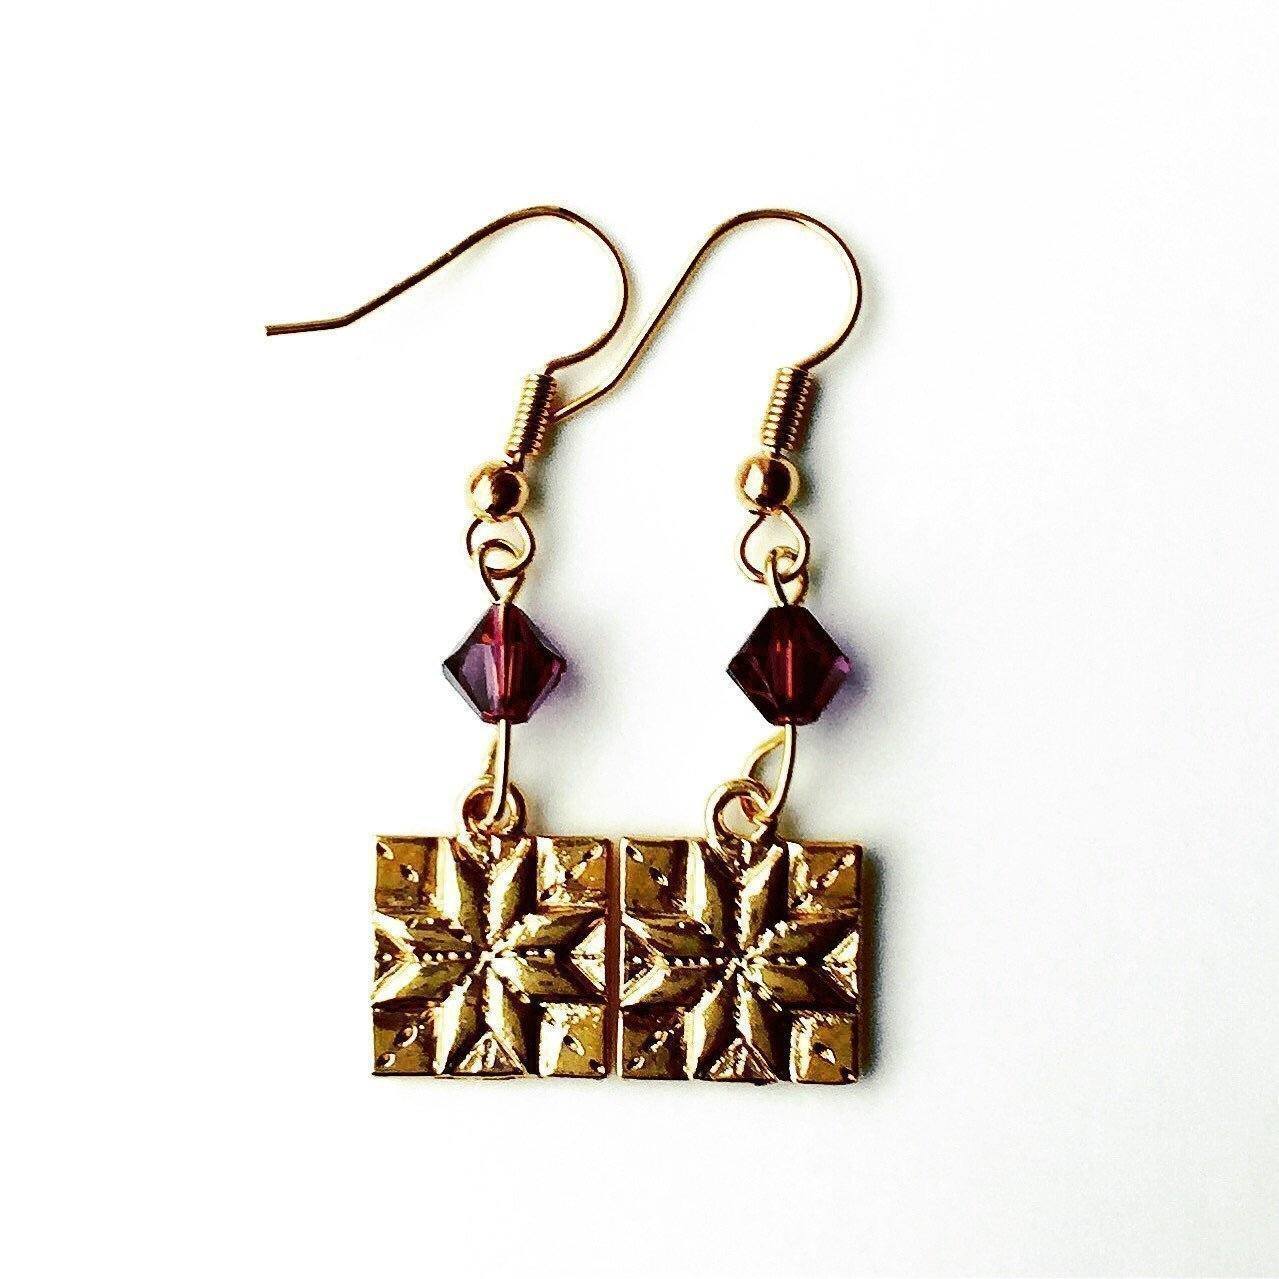 Quilt Patch Gold Earrings with Purple Swarovski Crystals-Watchus